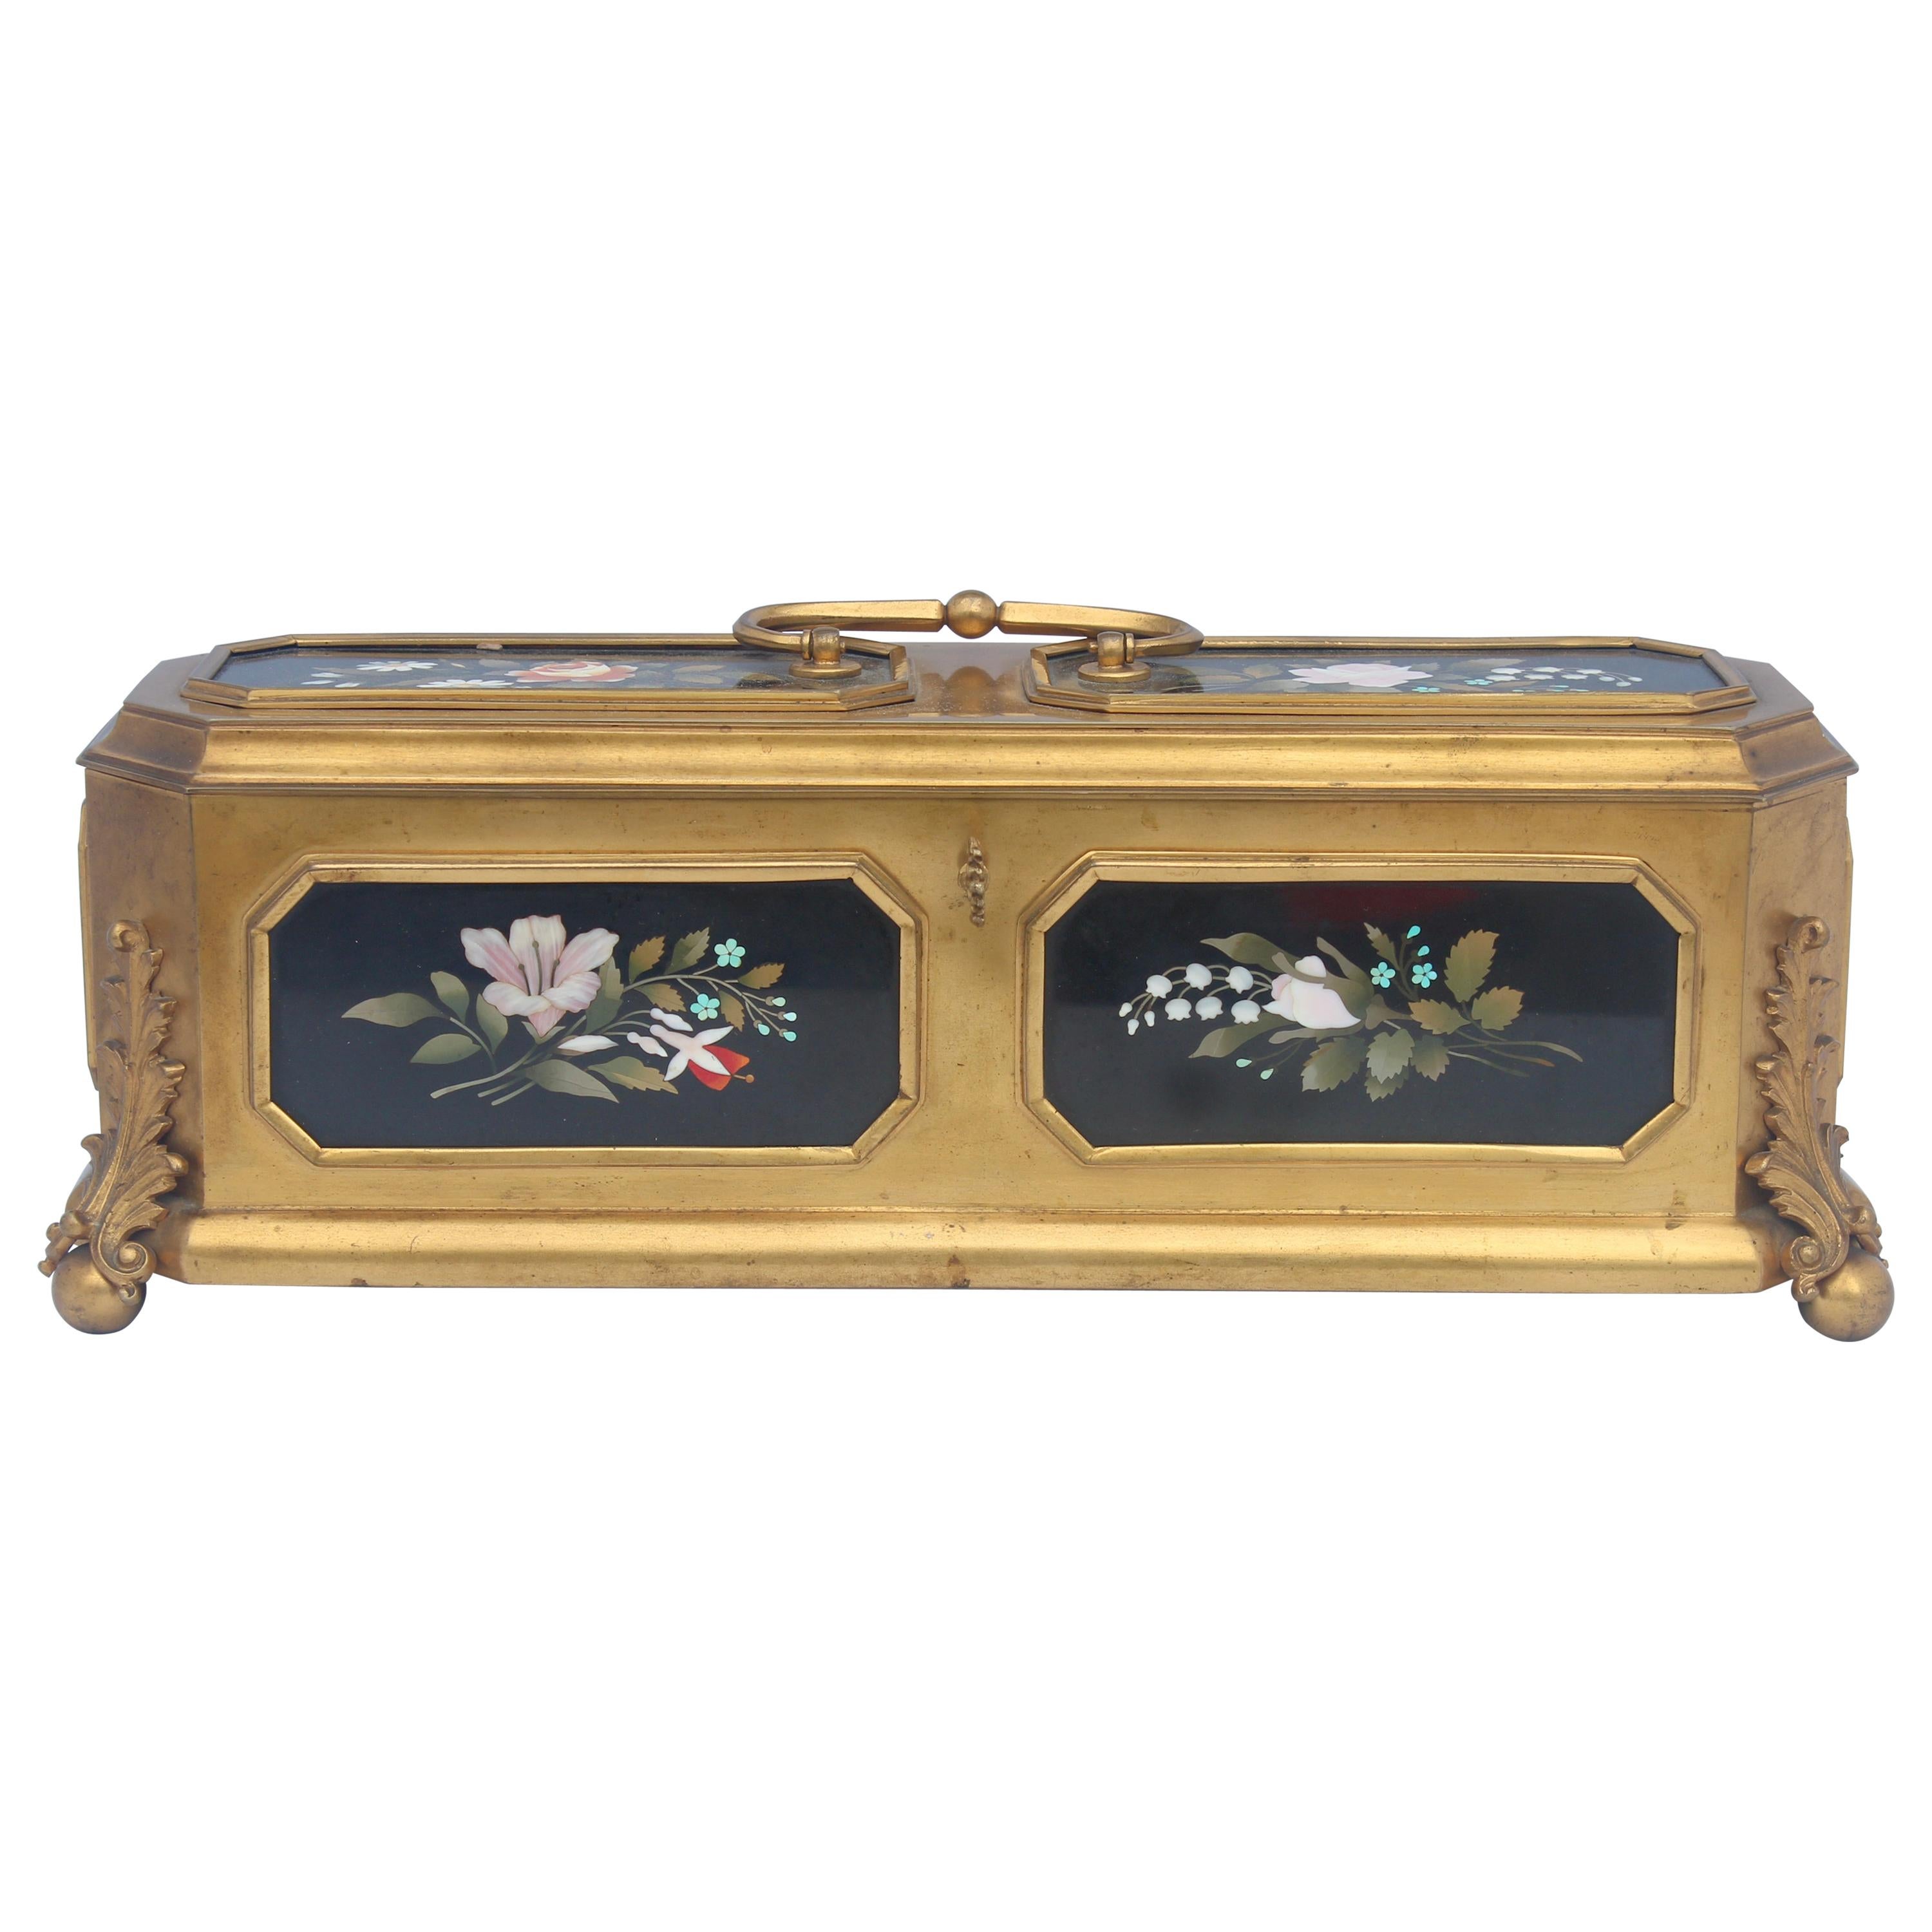 A French 19th century large ormolu jewelry casket
Decorated by Eight Flowers Design Polychromed Pietra Dura plaques, each of different design.
Original Capitonné silk inside
With an handle and its original key,
circa 1860

Attributed to Tahan